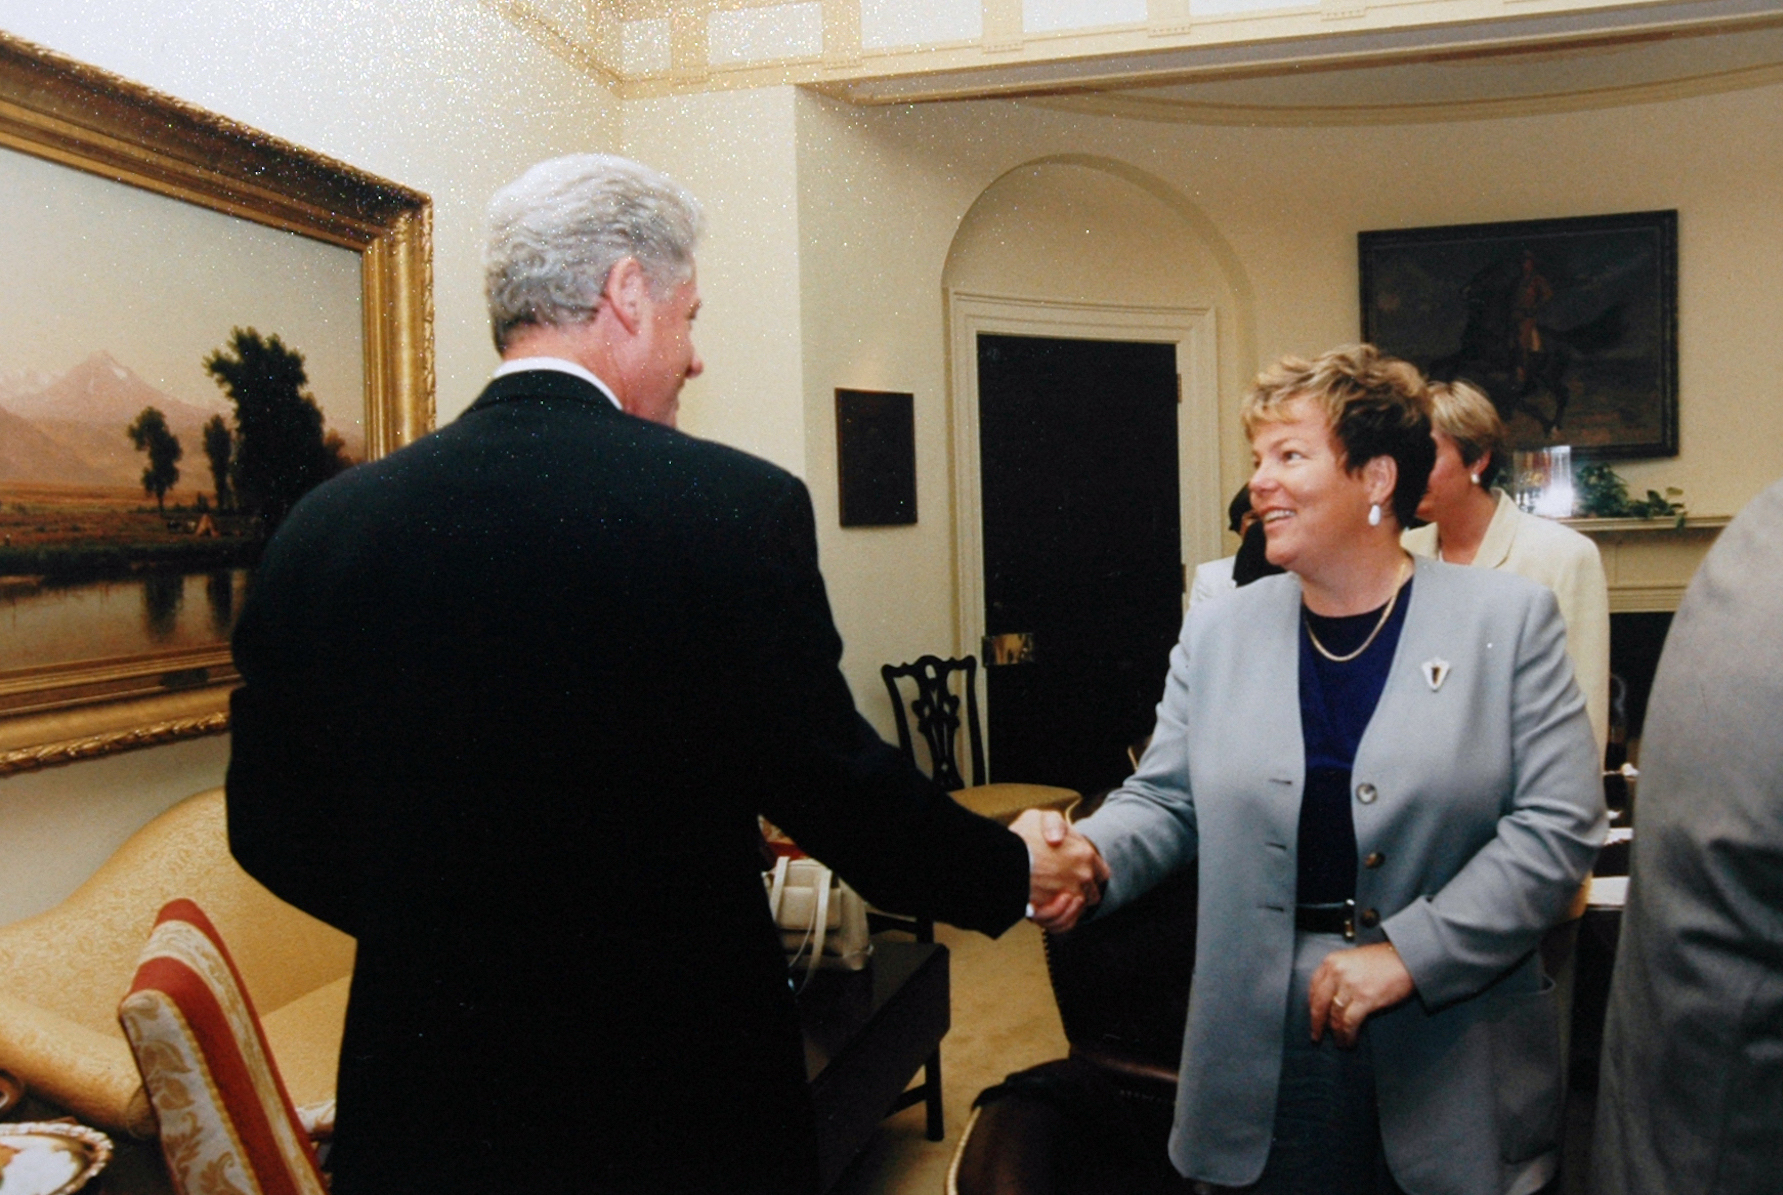 Lorri Jean meeting and shaking hands with President Bill Clinton at a convocation of LGBT leaders at the White House, Washington, DC, July 22, 1997.